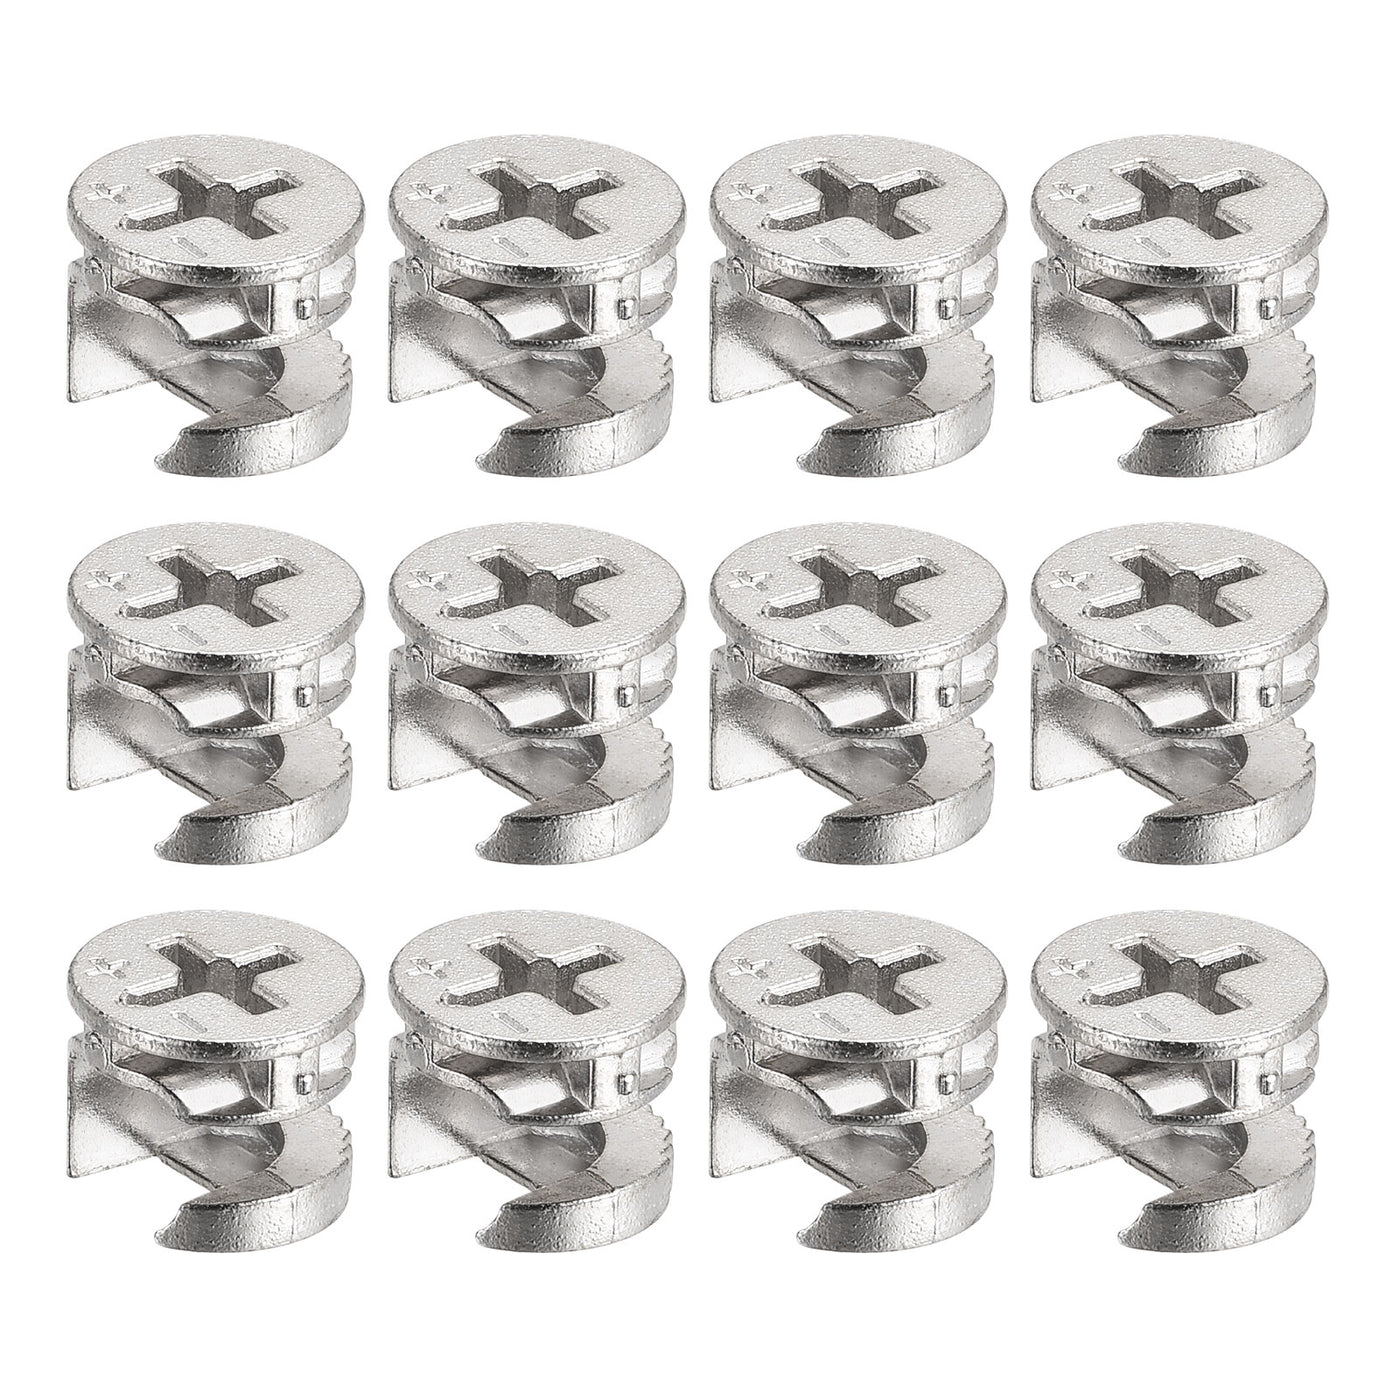 Uxcell Uxcell Cam Lock Nut for Furniture, 80pcs 11.65x9.8mm Joint Connector Locking Nuts